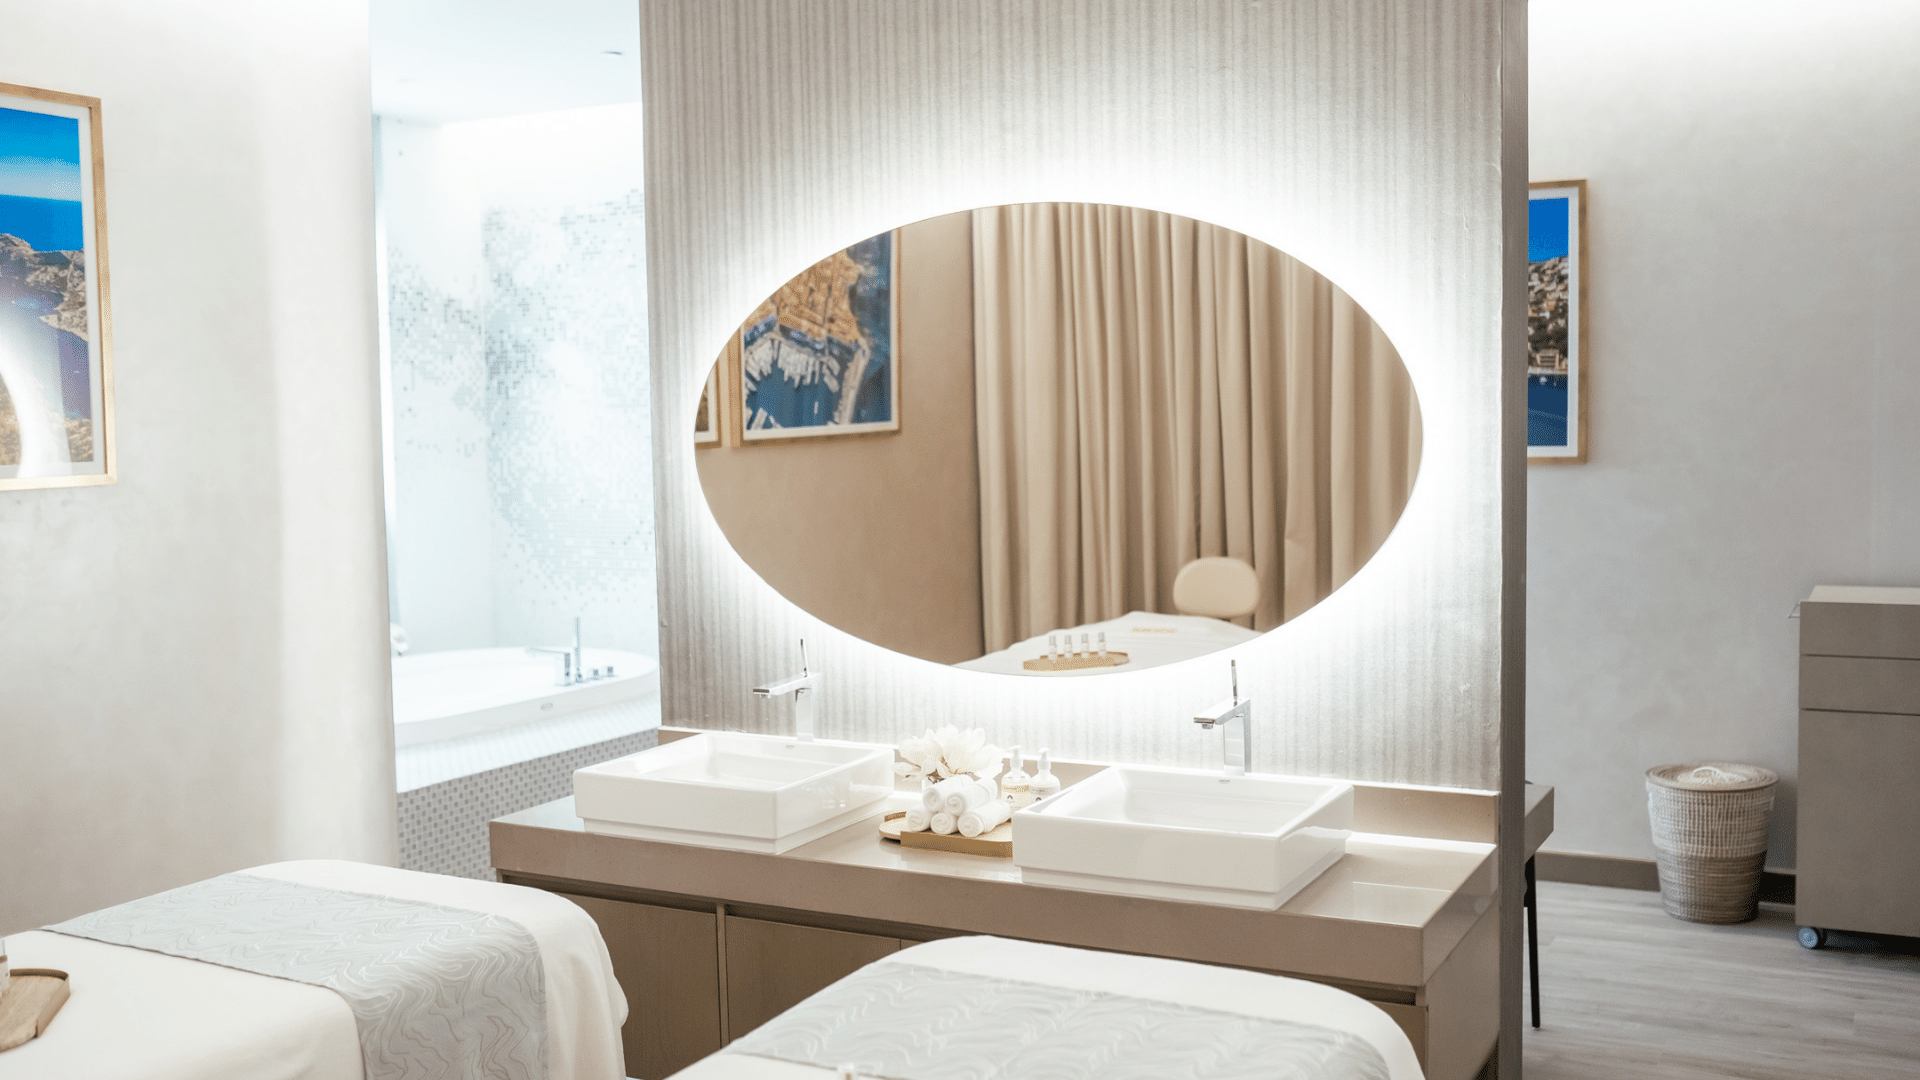 Beds with vanity in Pause Spa Château Berger at Paramount Hotel Midtown